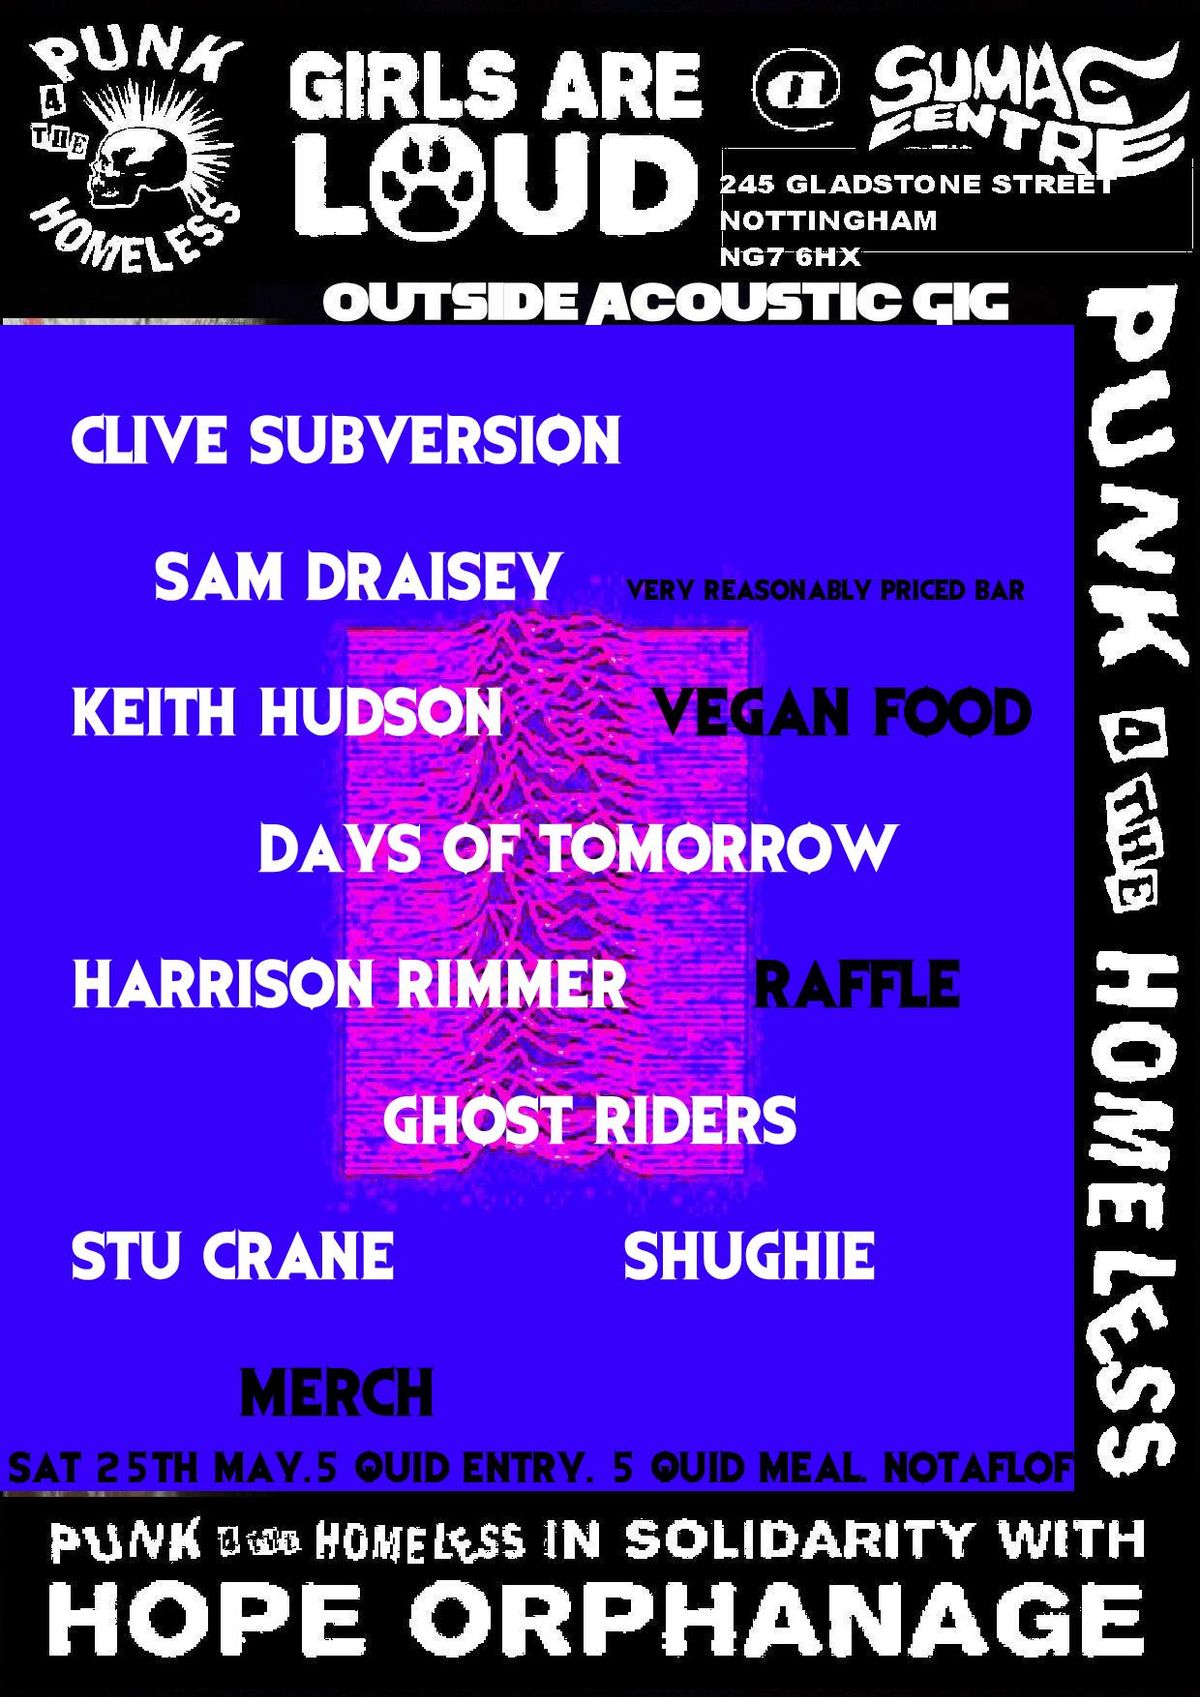 Punk 4 The Homeless - OUTSIDE ACOUSTIC GIG @ the Sumac Centre